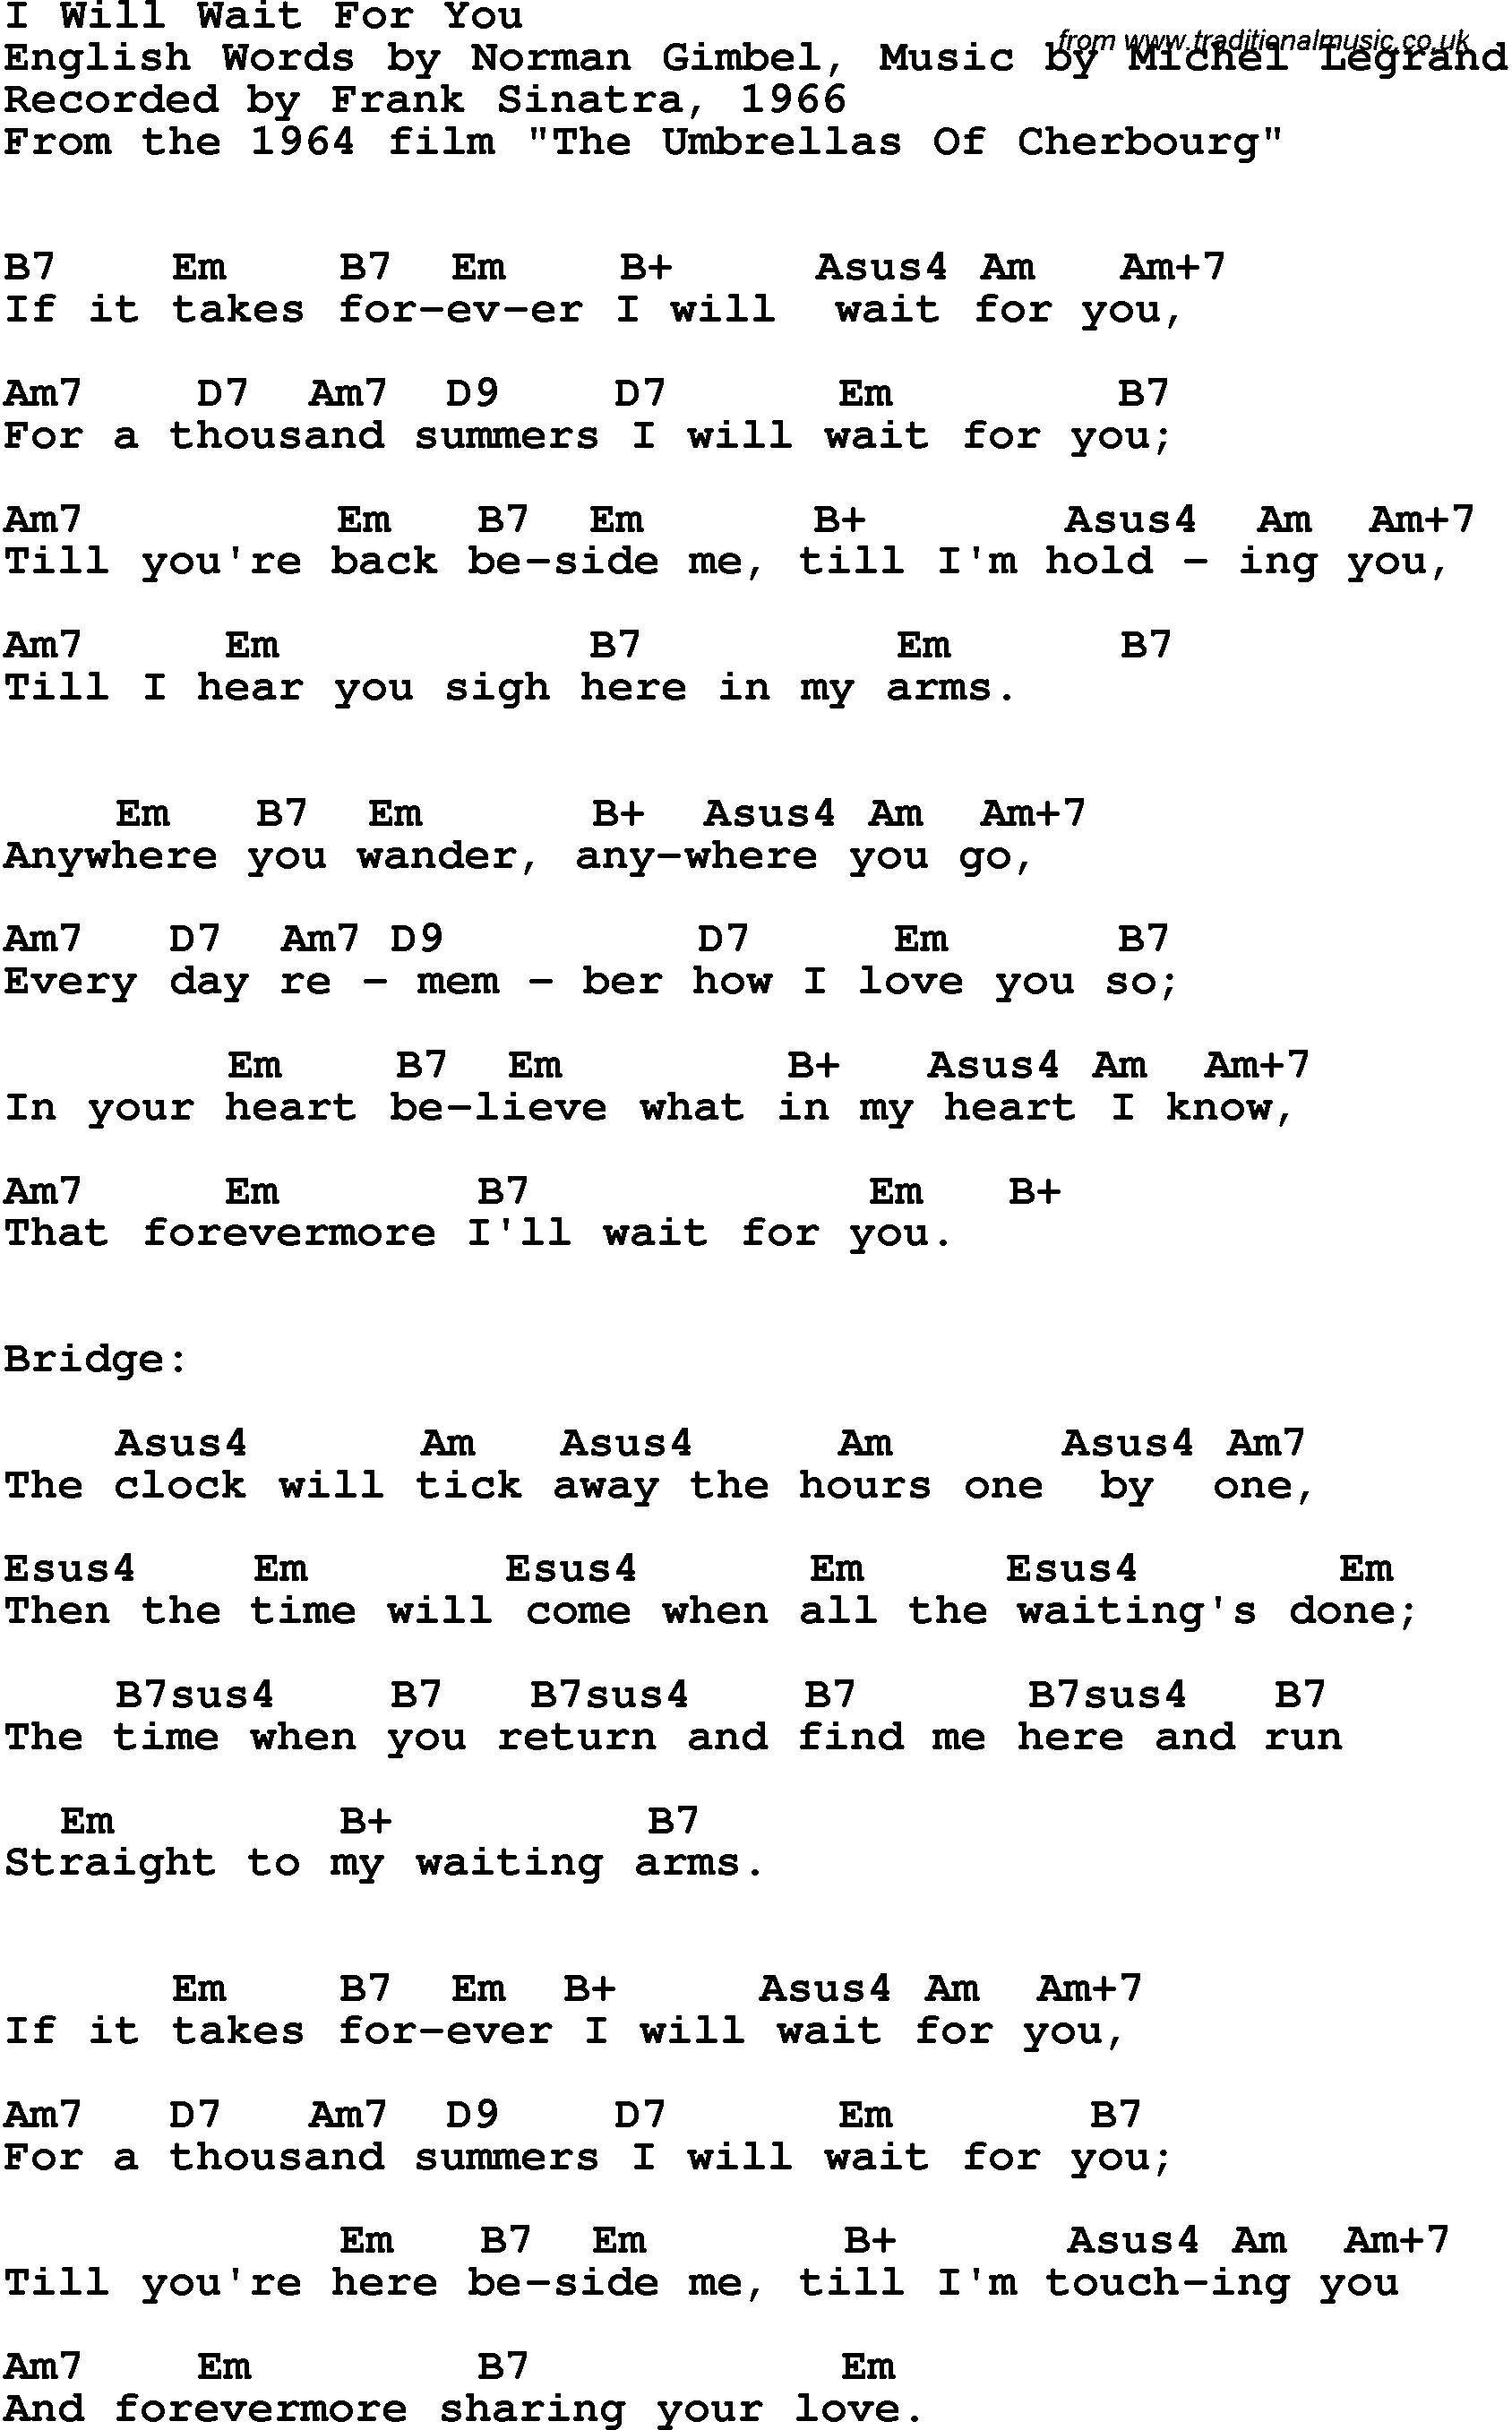 Song Lyrics with guitar chords for I Will Wait For You - Frank Sinatra, 1966